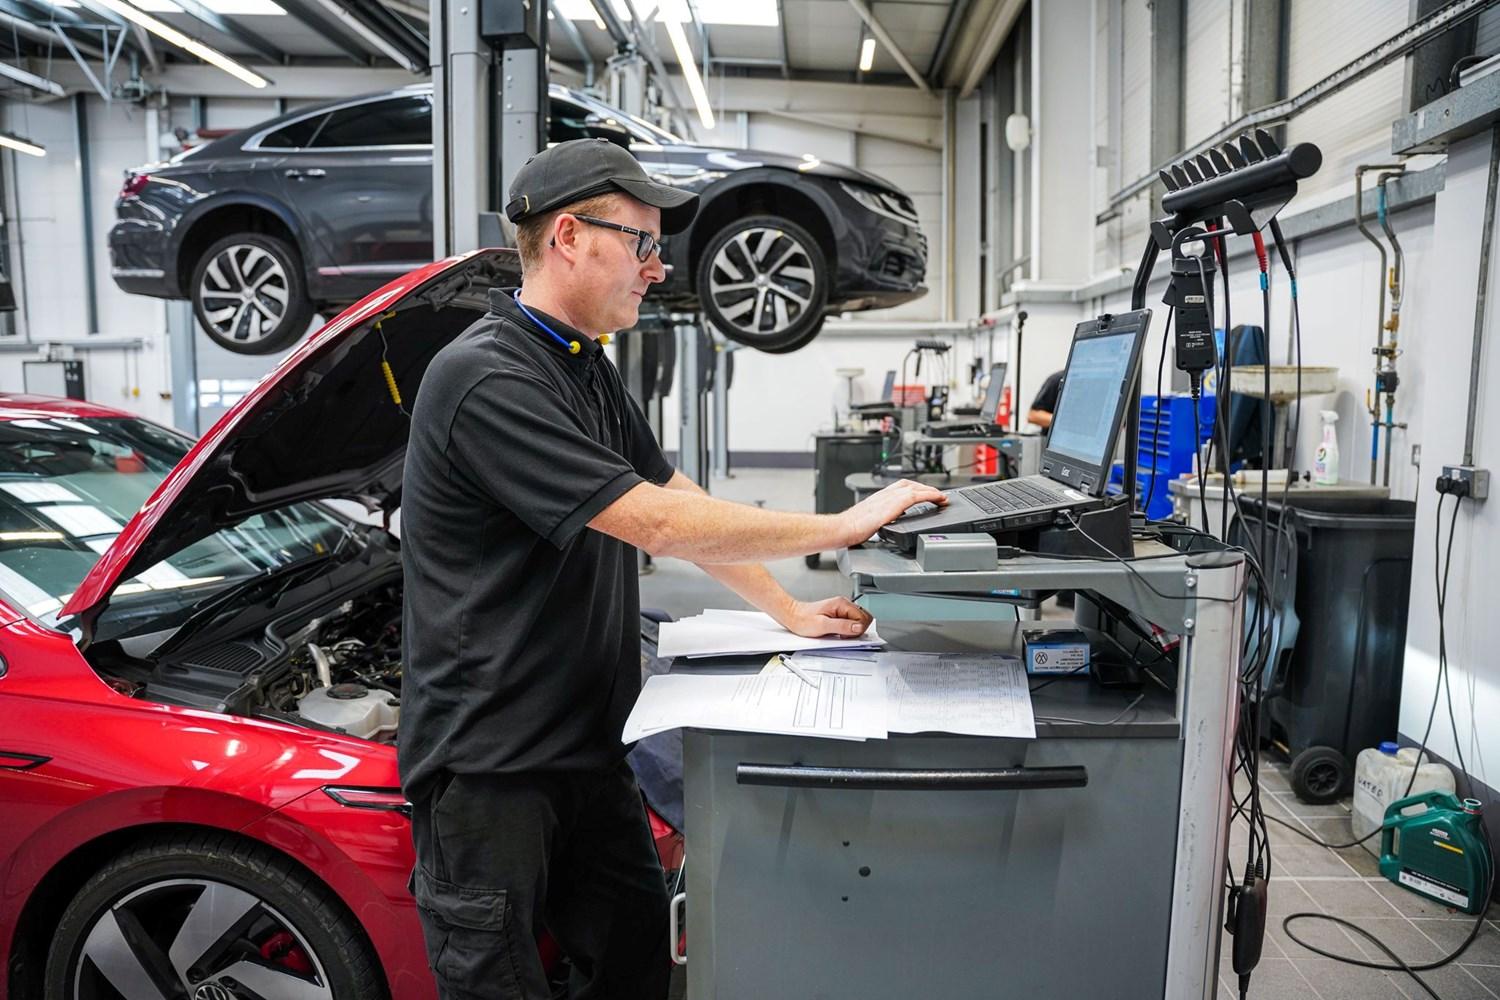 Volkswagen Service Specialist adds notes about Volkswagen ID.3 during service inspection at the Volkswagen Approved Accident Repair Centre, Agnew Volkswagen Belfast